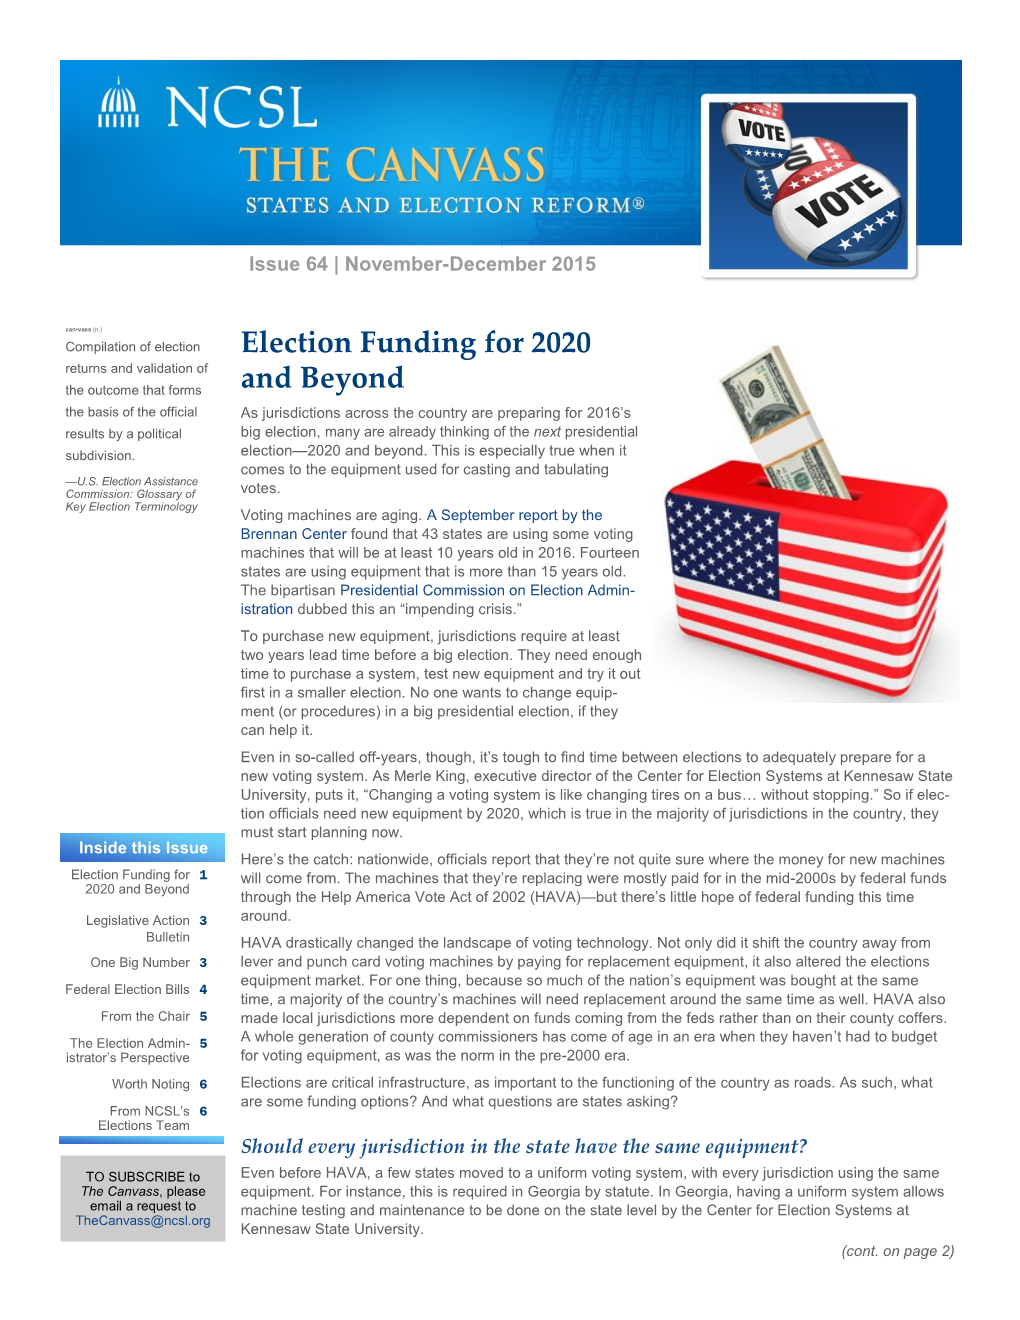 Election Funding for 2020 and Beyond, Cont